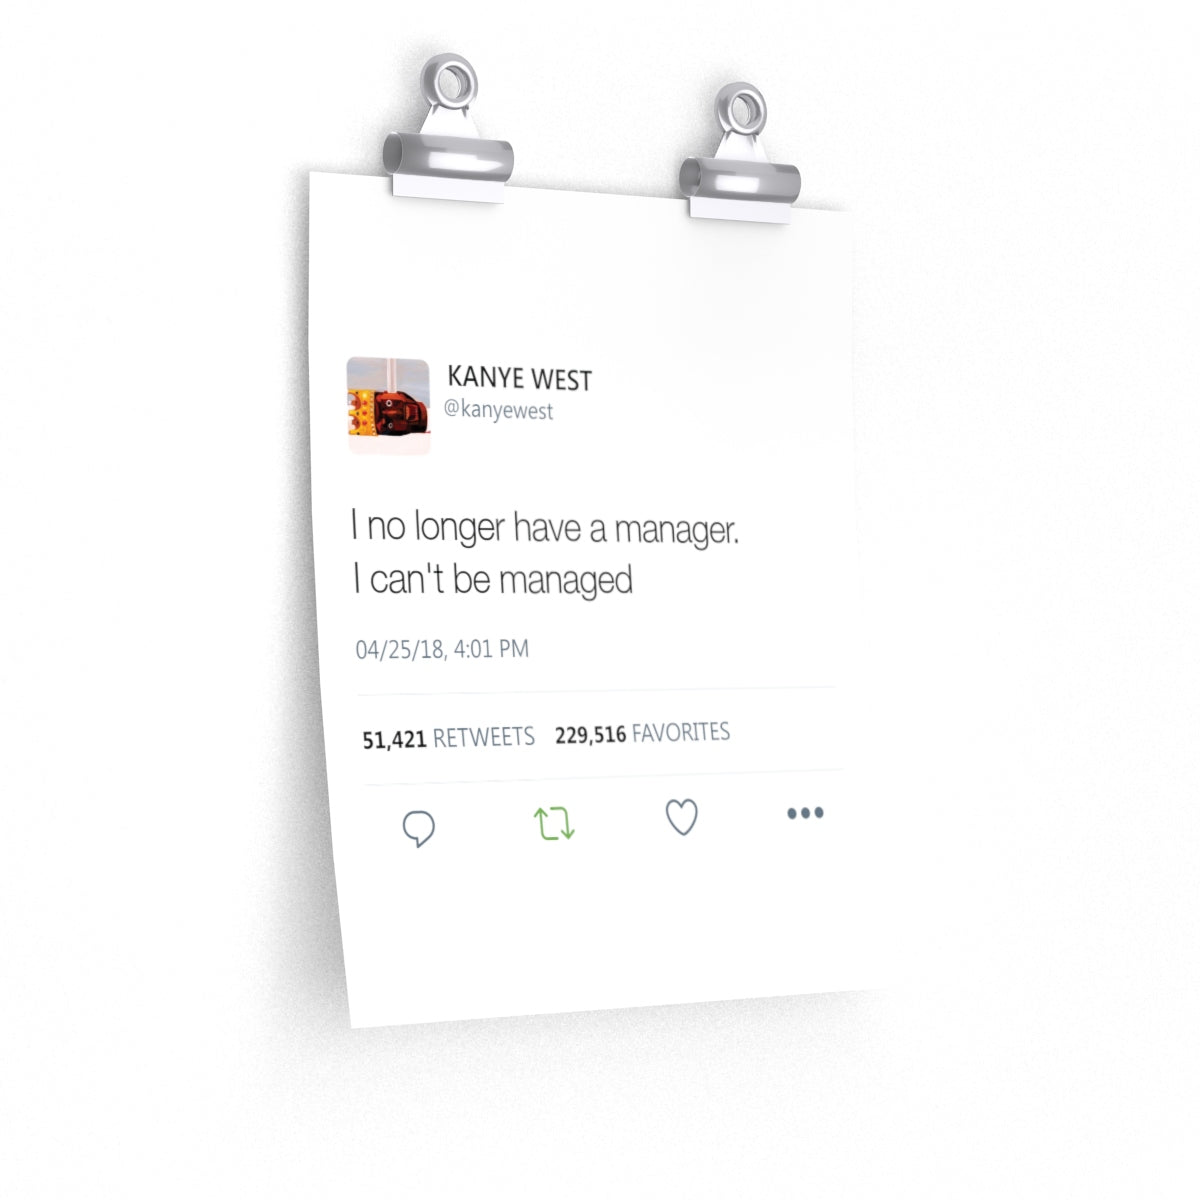 I no longer have a manager. I can't be managed - Kanye West Tweet Twitter Quote Premium Matte vertical posters-9'' x 11''-CG Matt-Archethype